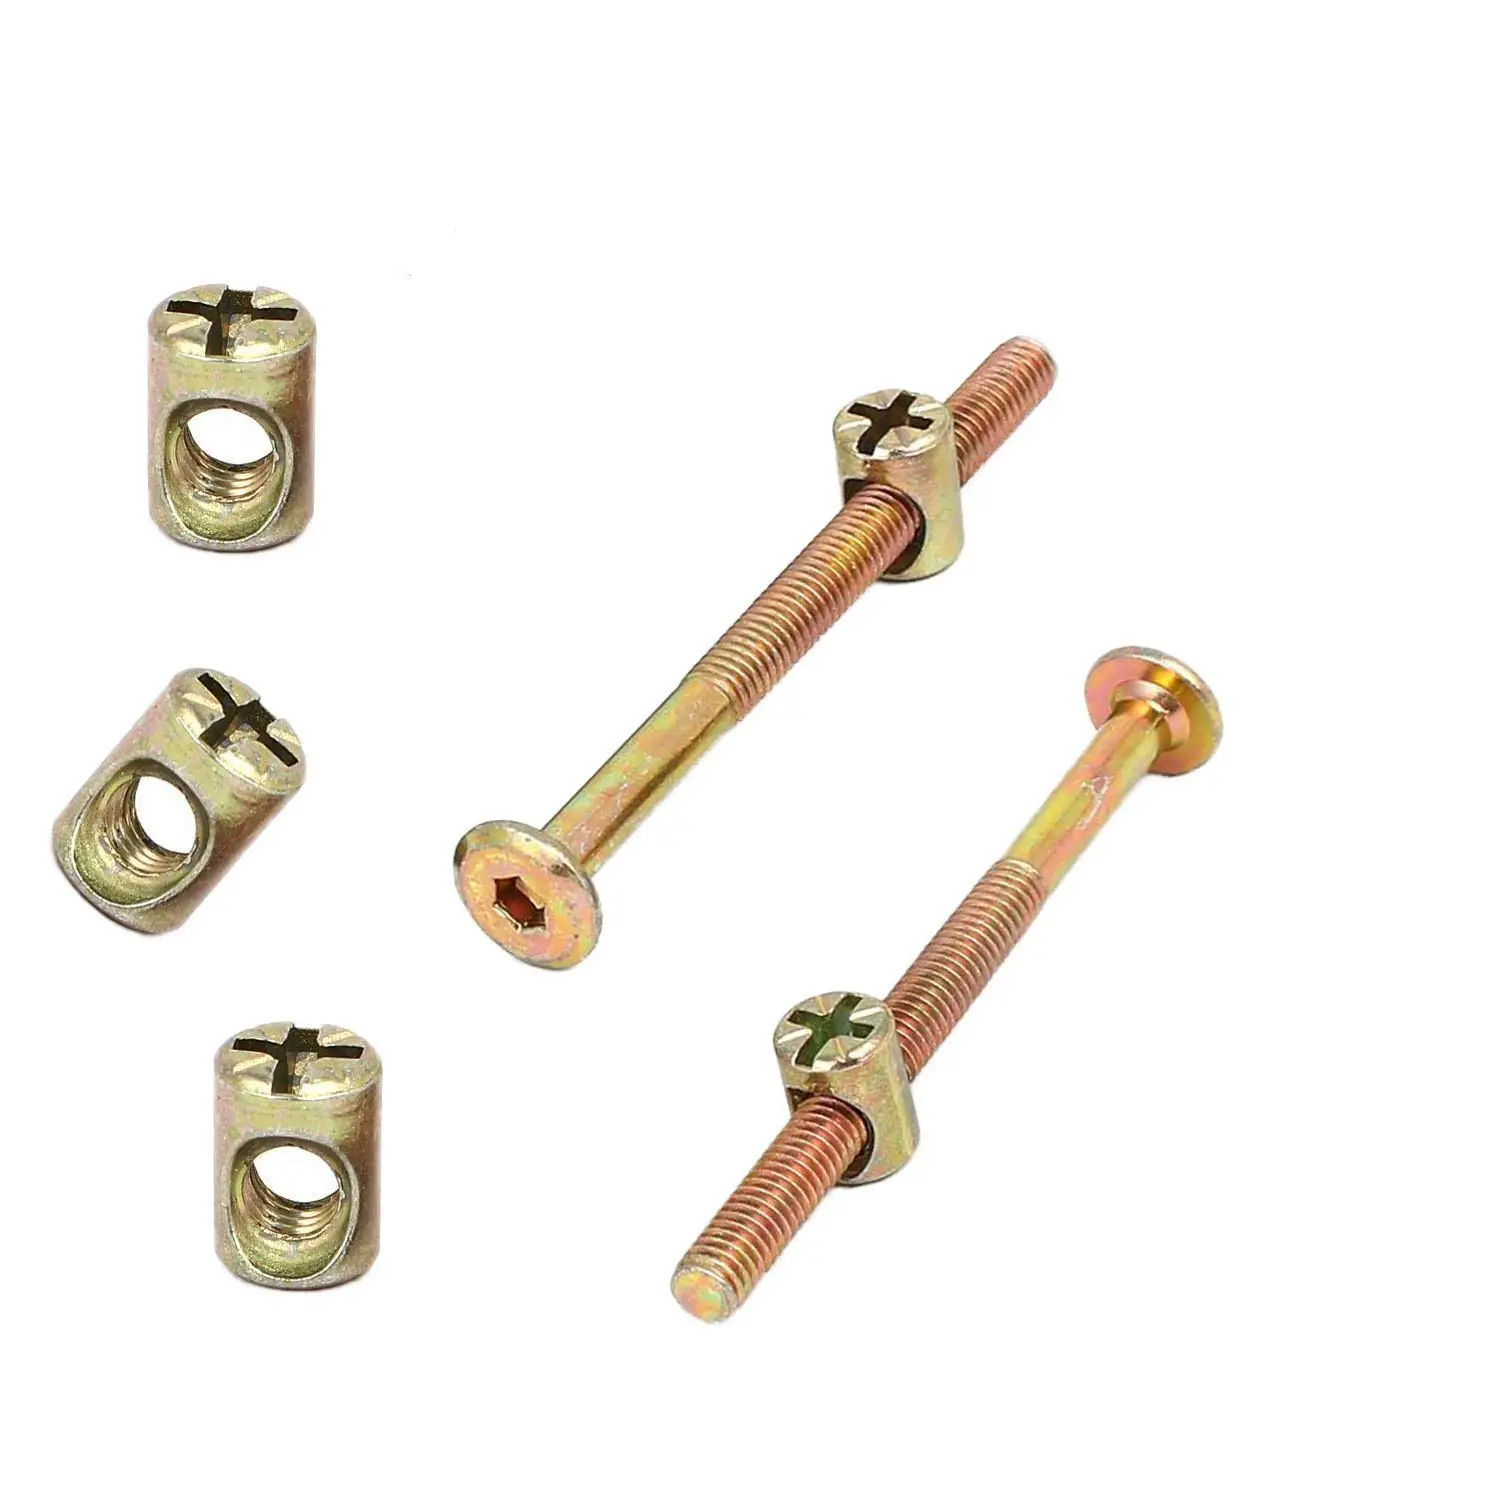 M6 x 100MM 5 KITS OF 4 SCREWS 4 NUTS /& ALLEN KEY FOR BEDS COTS FURNITURE ETC